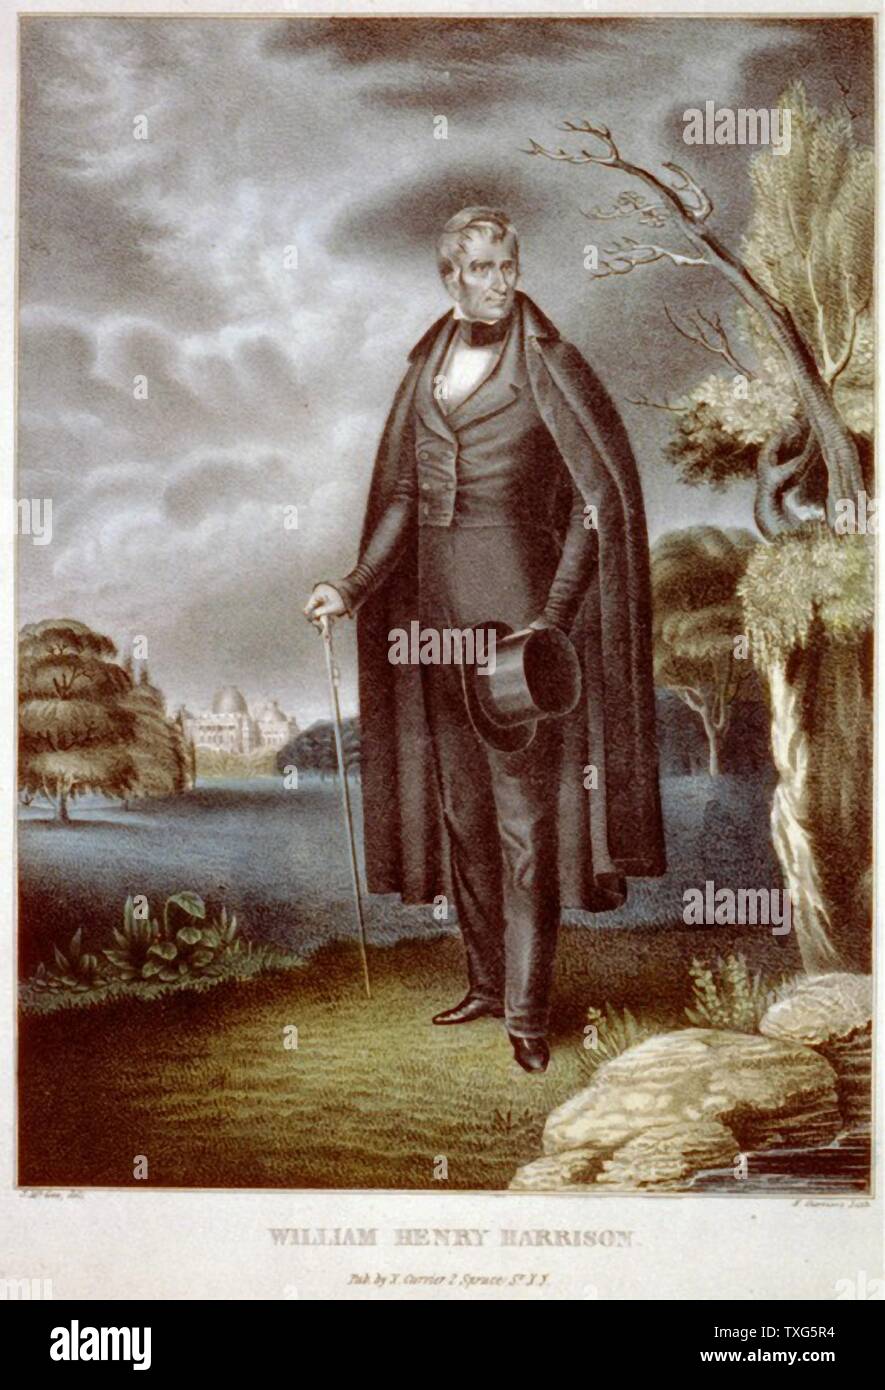 William Henry Harrison (1773-1841) American soldier and politician. Ninth President f the United States of America 1841. Died on 32nd day in office Coloured lithograph. Stock Photo